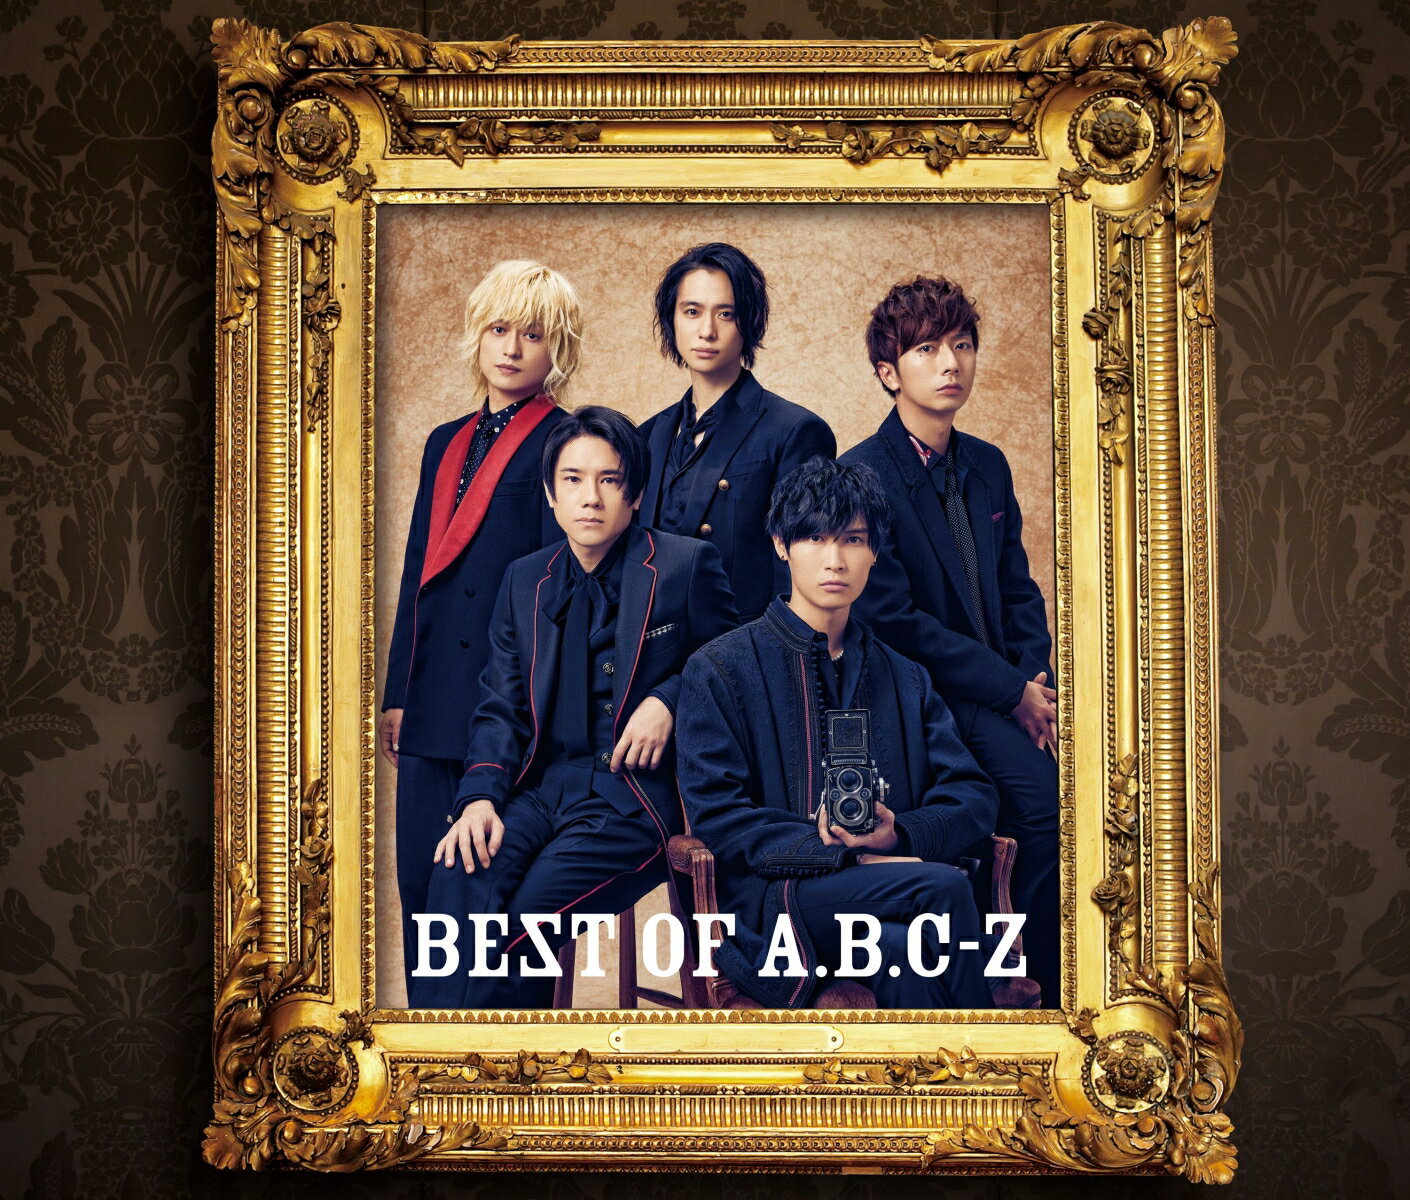 BEST OF A.B.C-Z -Variety Collection- (初回限定盤B 3CD＋DVD) (特典なし)